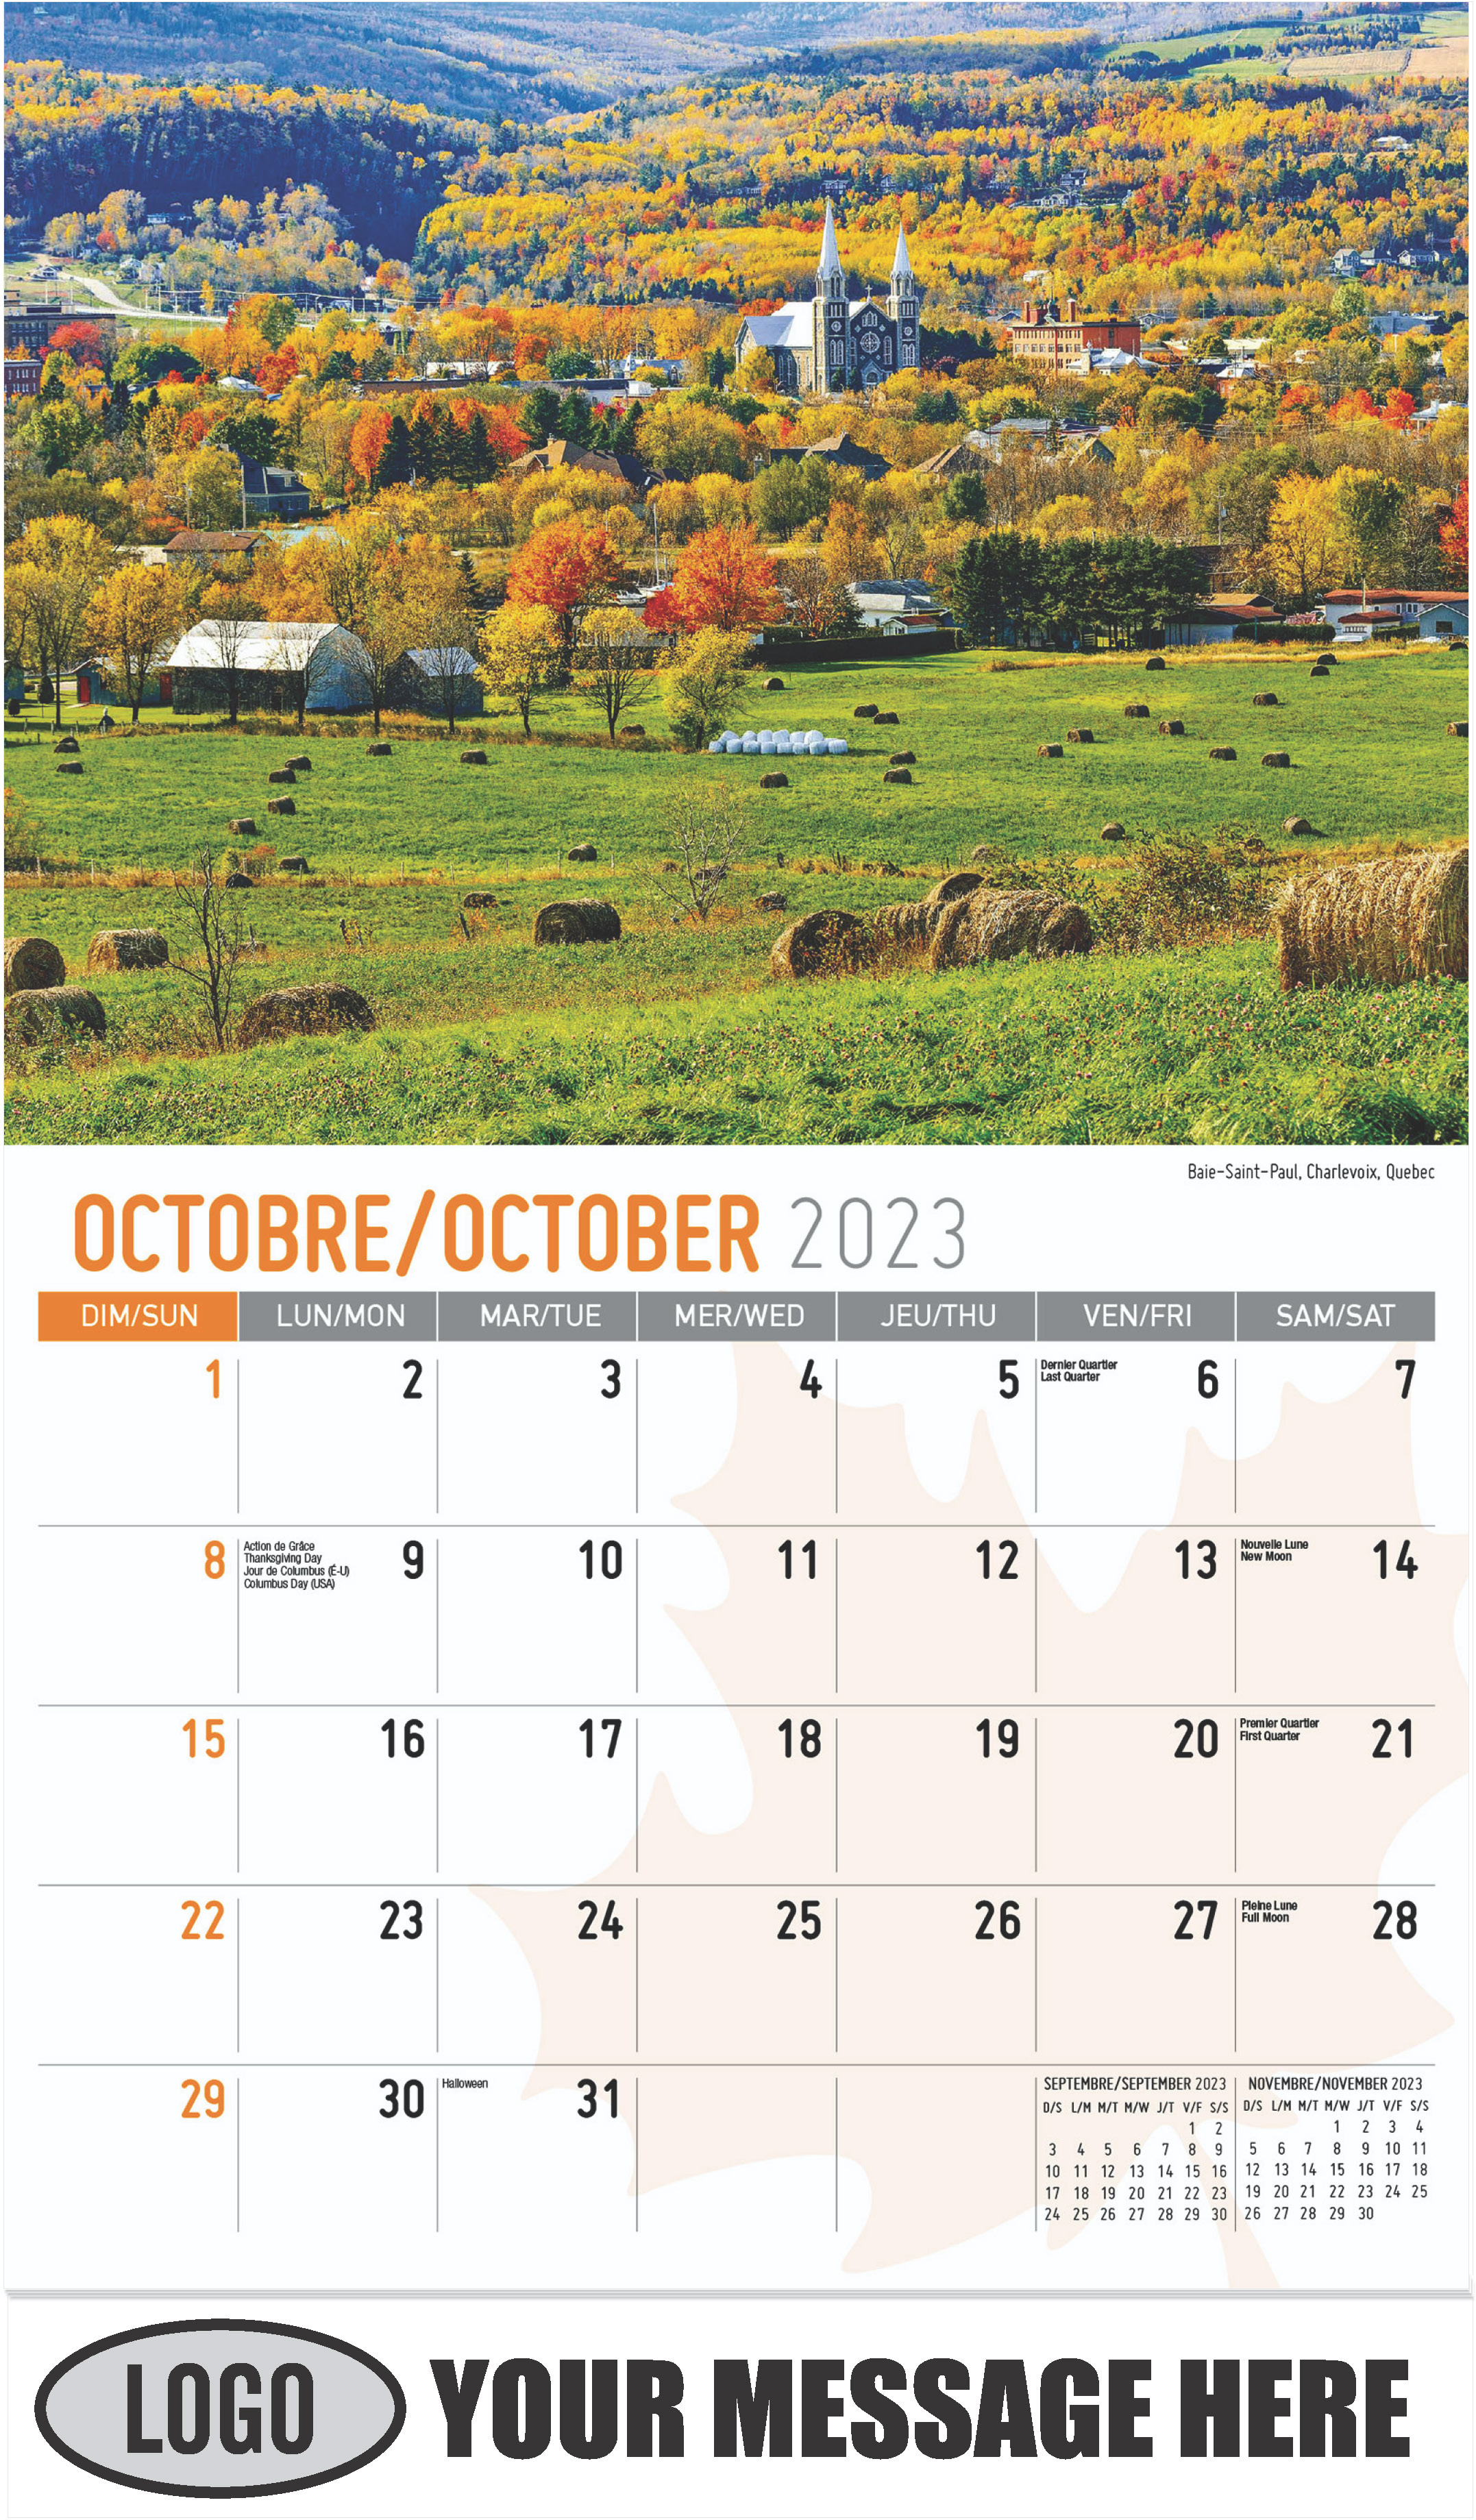 Baie-Saint-Paul, Charlevoix, Quebec - October - Scenes of Canada(French-English bilingual) 2023 Promotional Calendar